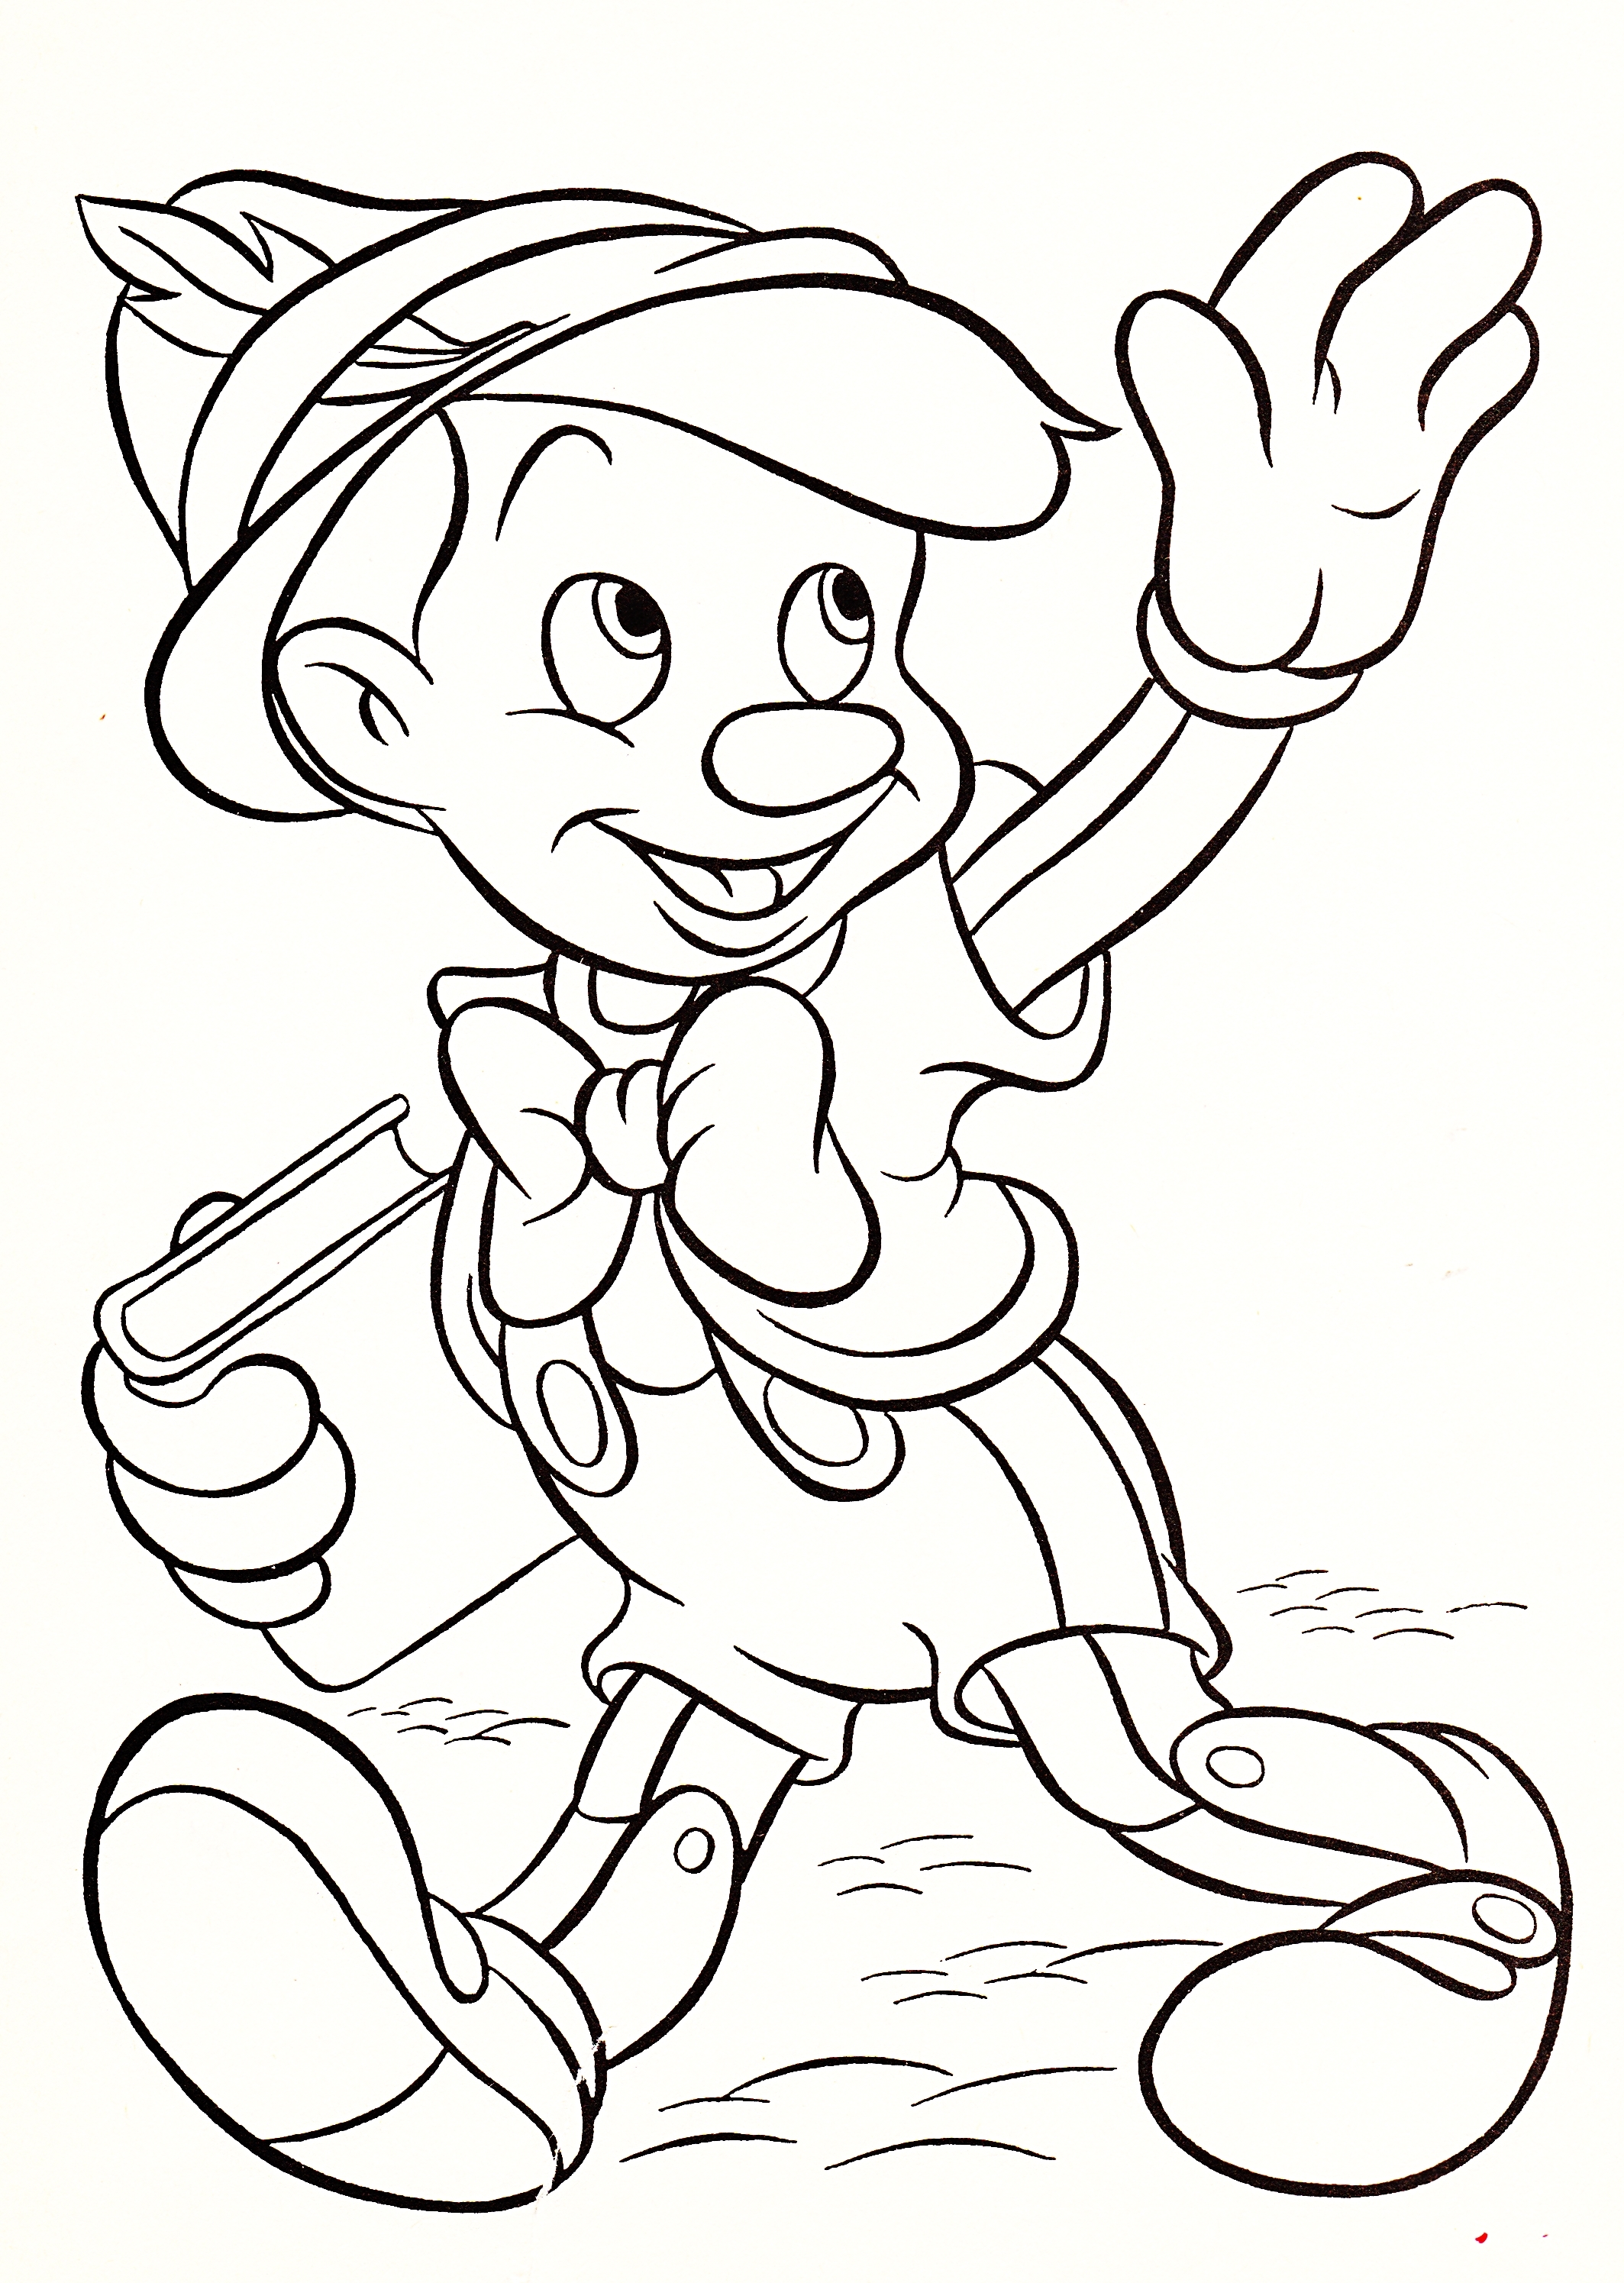 free-coloring-pages-of-disney-characters-at-getdrawings-free-download